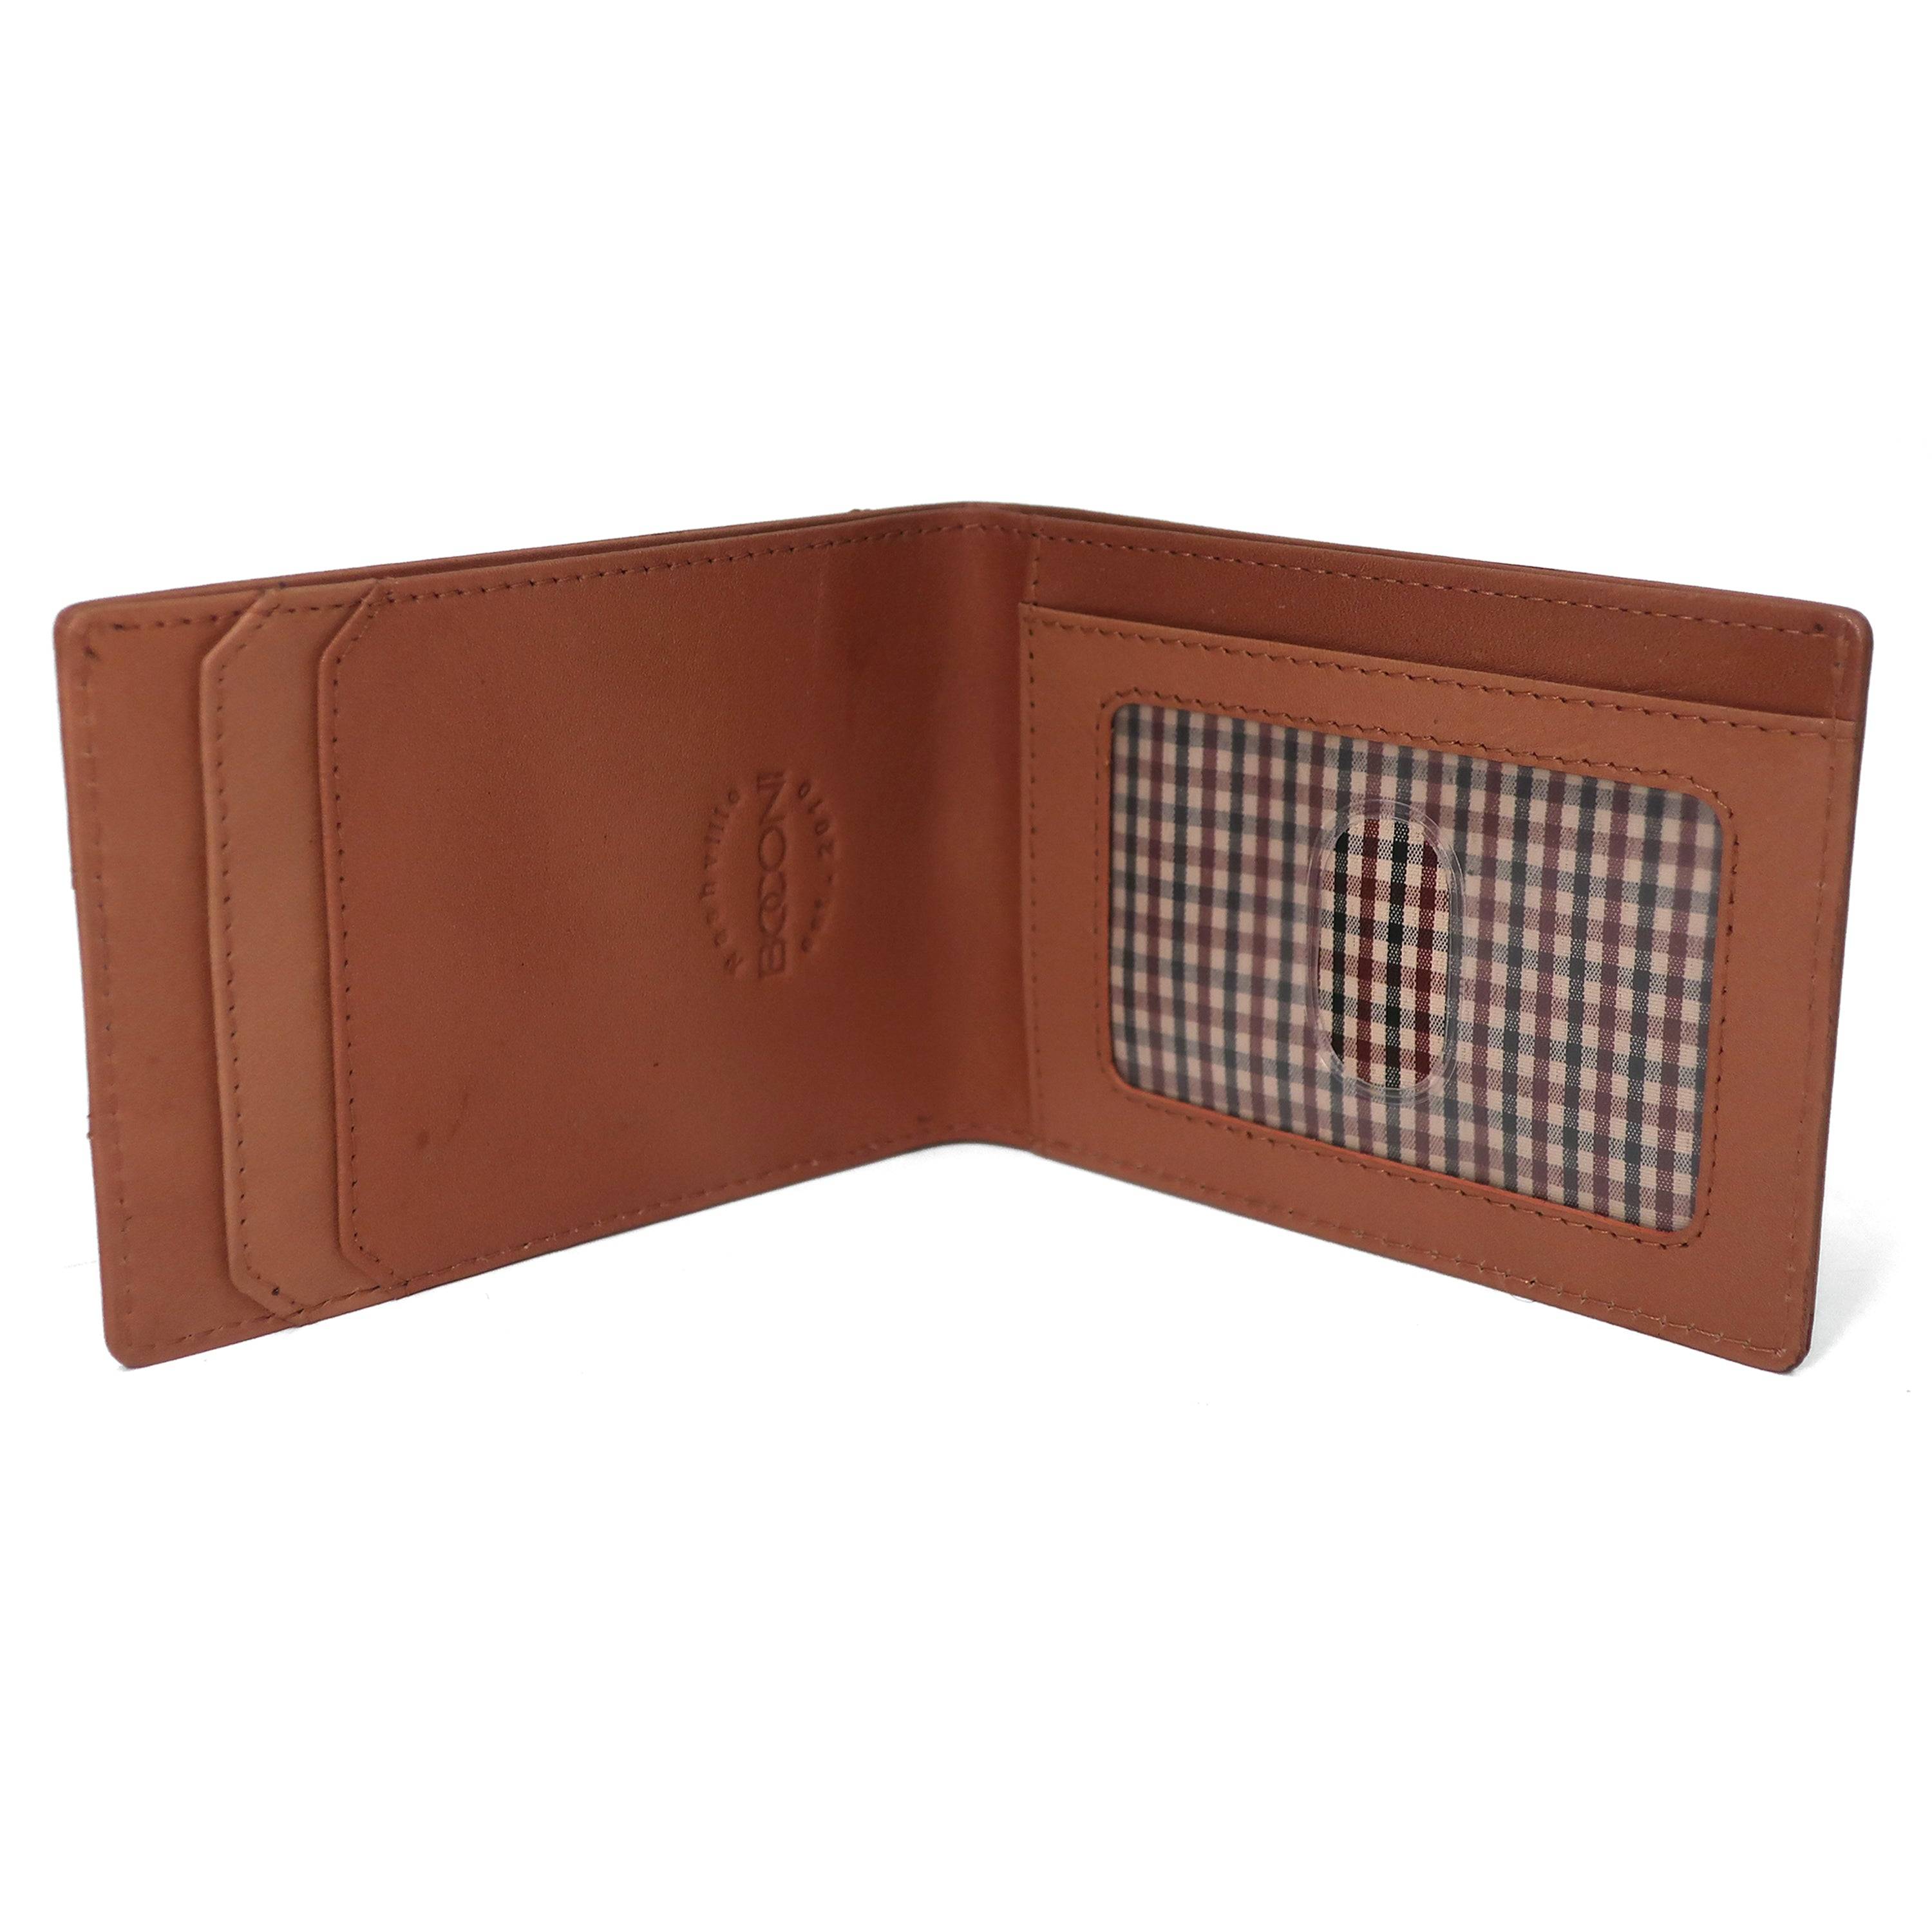 Dawn Compact Burnished Leather Wallet